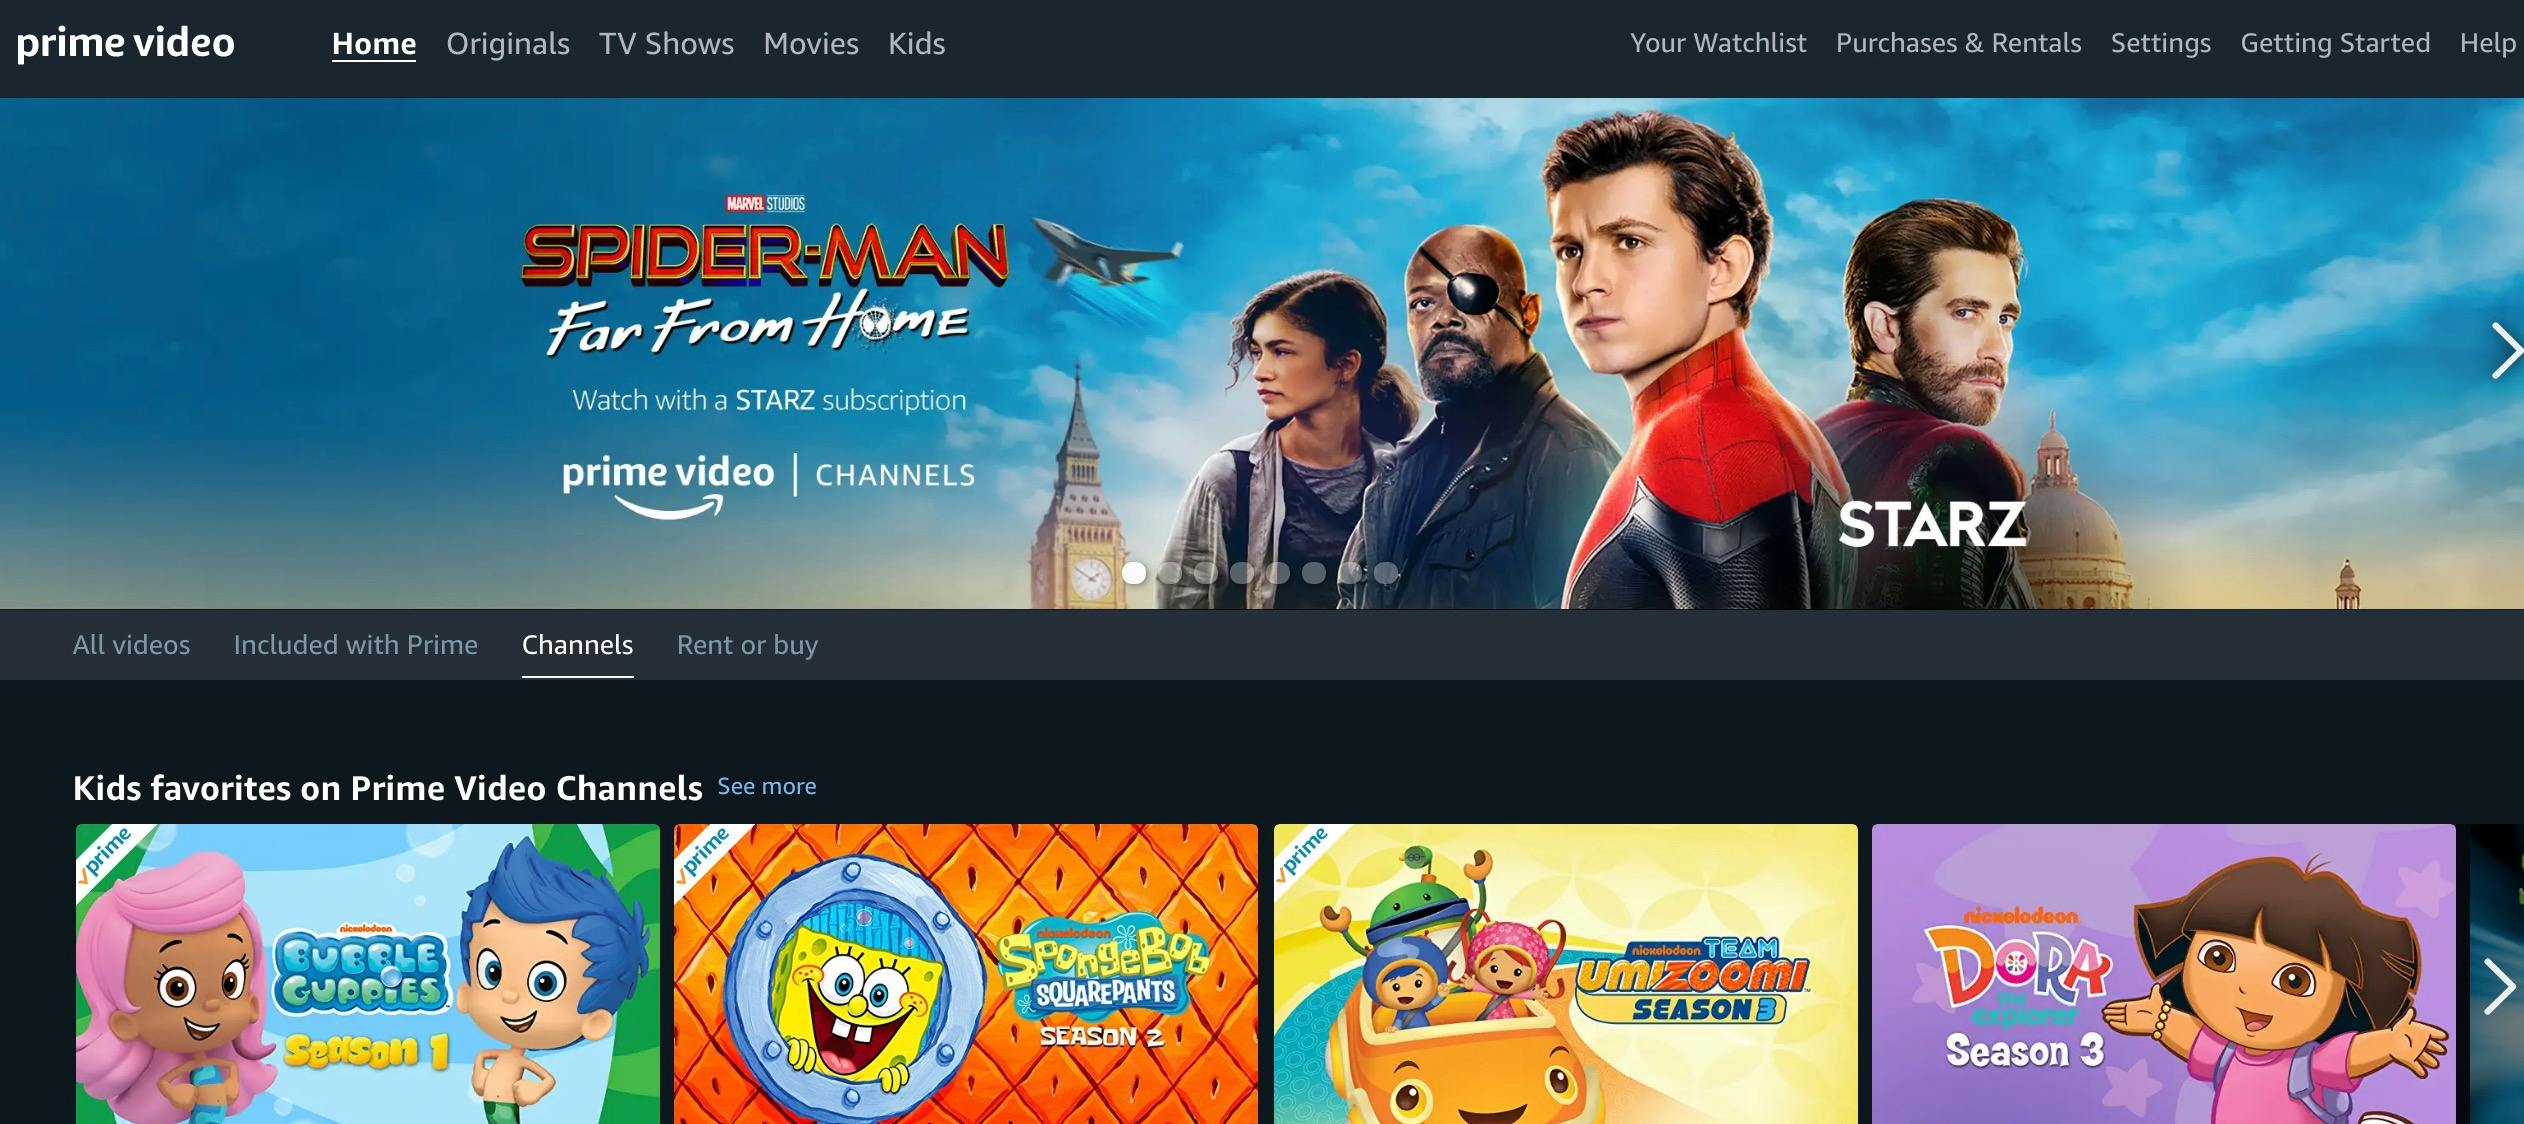 Get A 7 Day Free Trial Of Amazon Prime Video Channels The Krazy Starz Trial On Amazon Primeamazon Prime Free 6 Months For Studentsamazon Prime Free 7 Day Trial